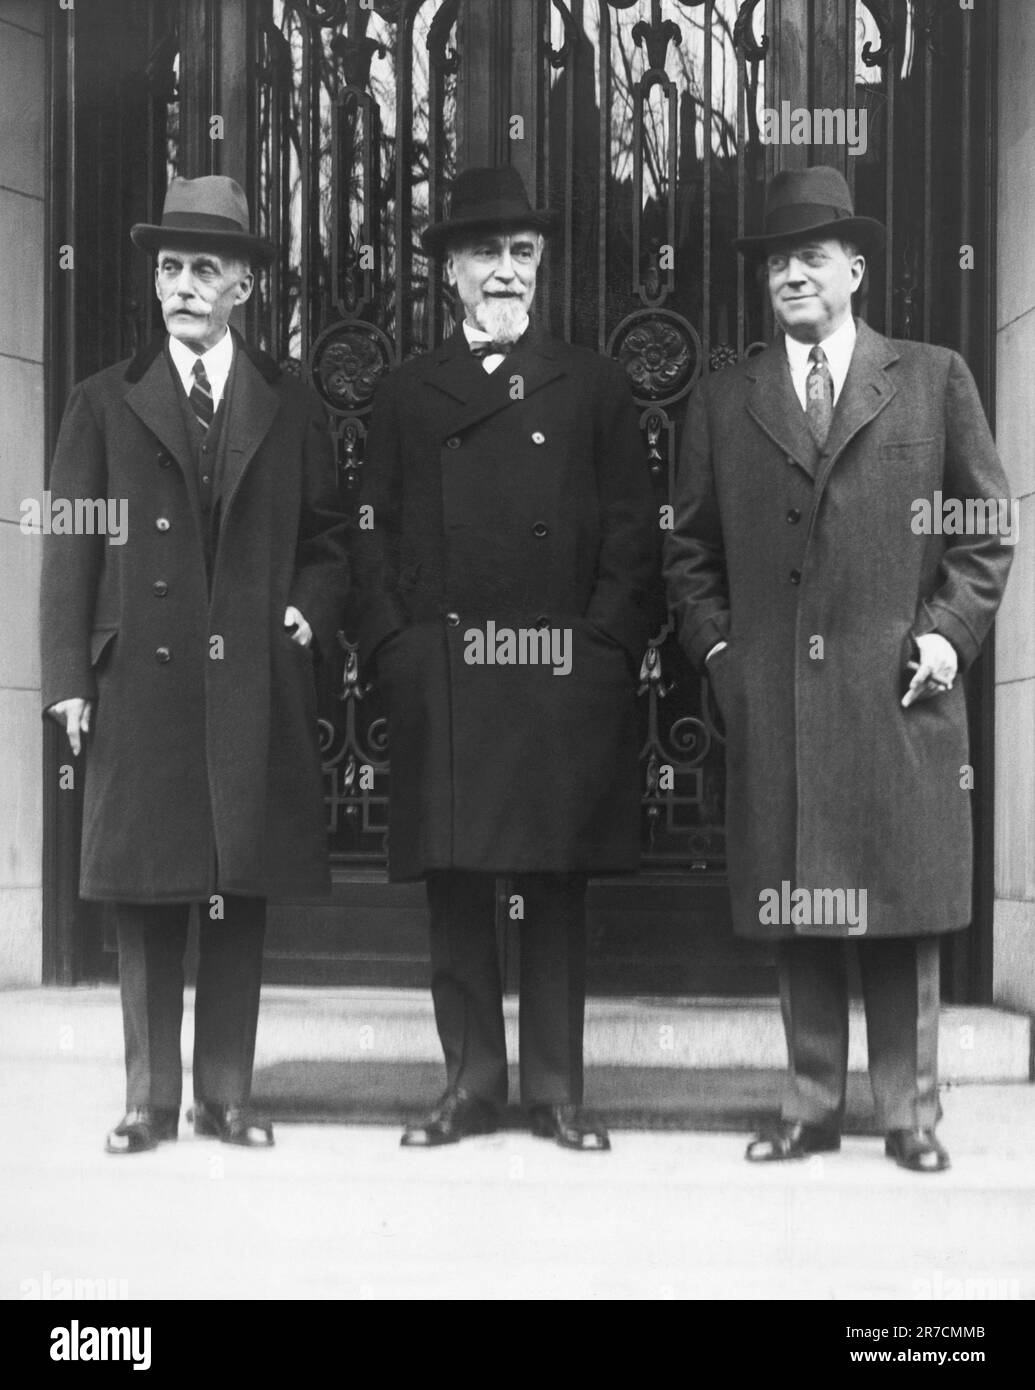 Washington, D.C.:  April 7, 1931 L-R: Treasury Secretary Andrew Mellon, Governor of the Bank of England Sir Montague Norman, and Eugene Meyer, Governor of the Federal Reserve Board, on the steps of Mellon's Washington home before a luncheon. Stock Photo